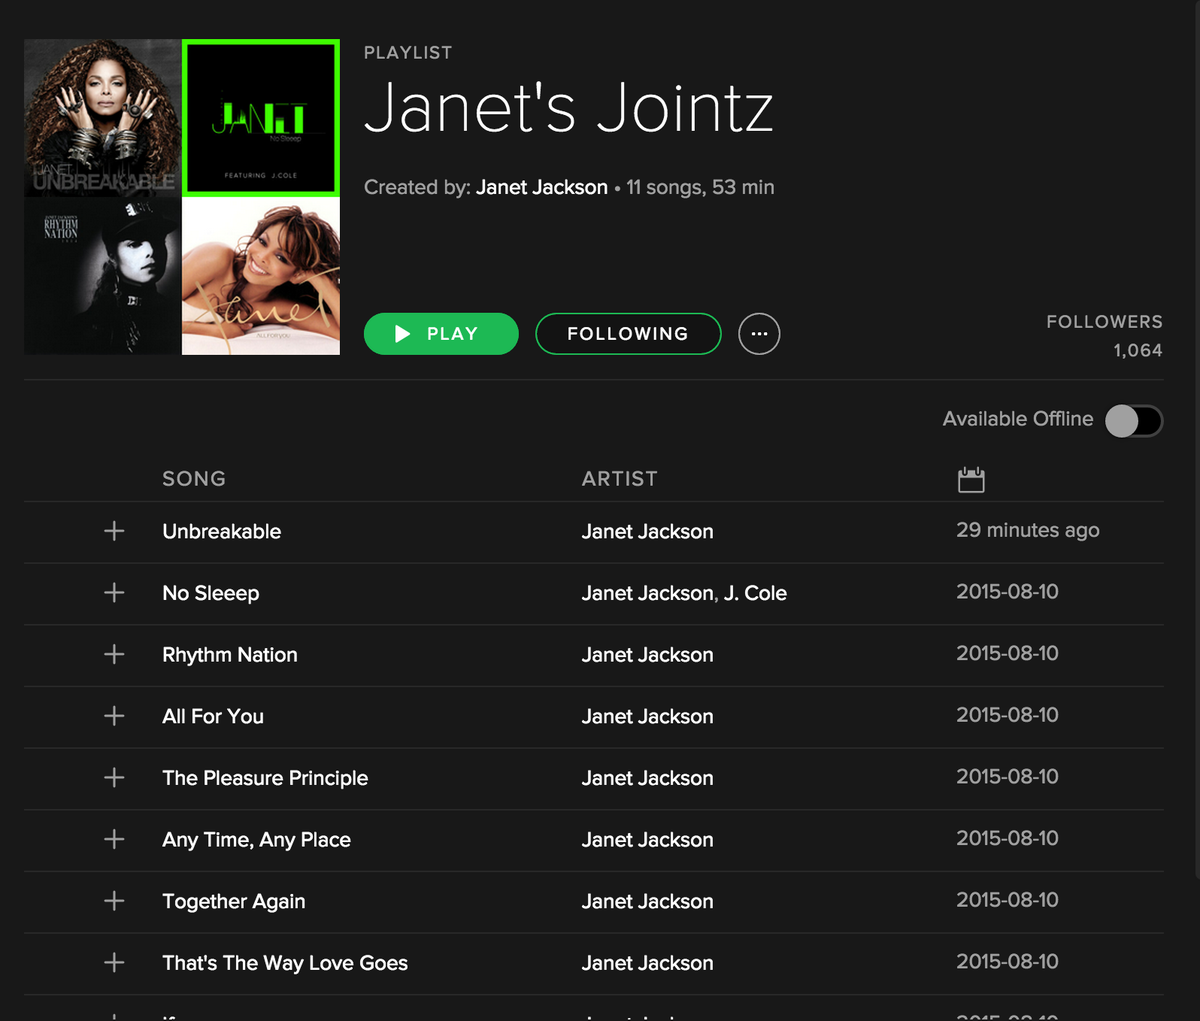 “Unbreakable” has been added to the Janet’s Jointz playlist on @Spotify! #Unbreakable http://t.co/6nE65MVMIa http://t.co/49IsZFjwYC